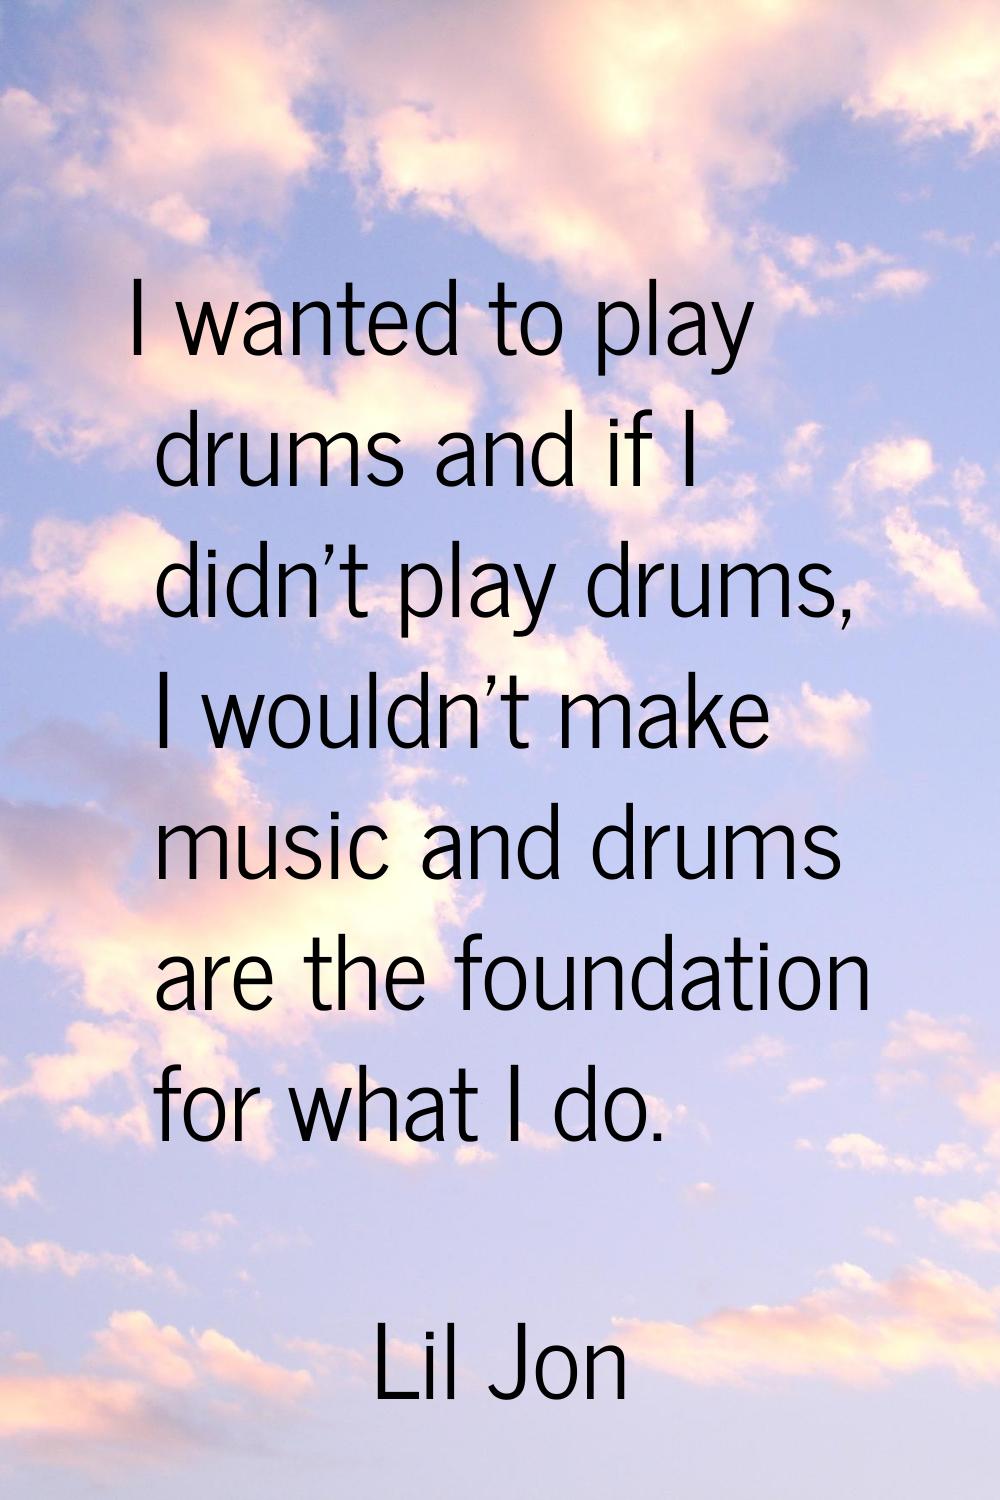 I wanted to play drums and if I didn't play drums, I wouldn't make music and drums are the foundati